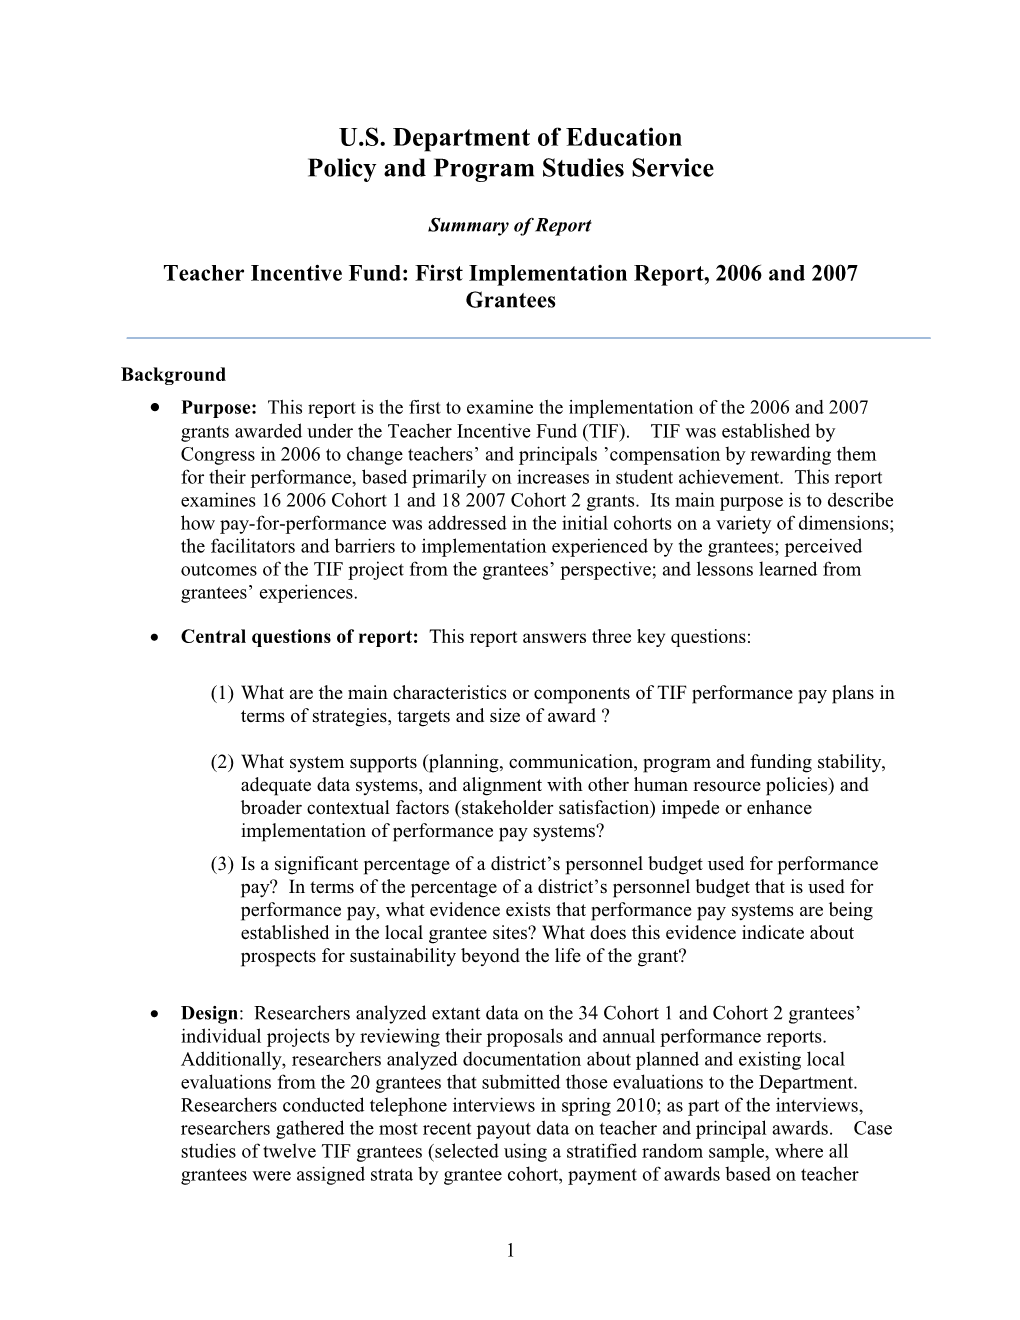 Teacher Incentive Fund: First Implementation Report, 2006 an 2007 Grantees (MS Word)